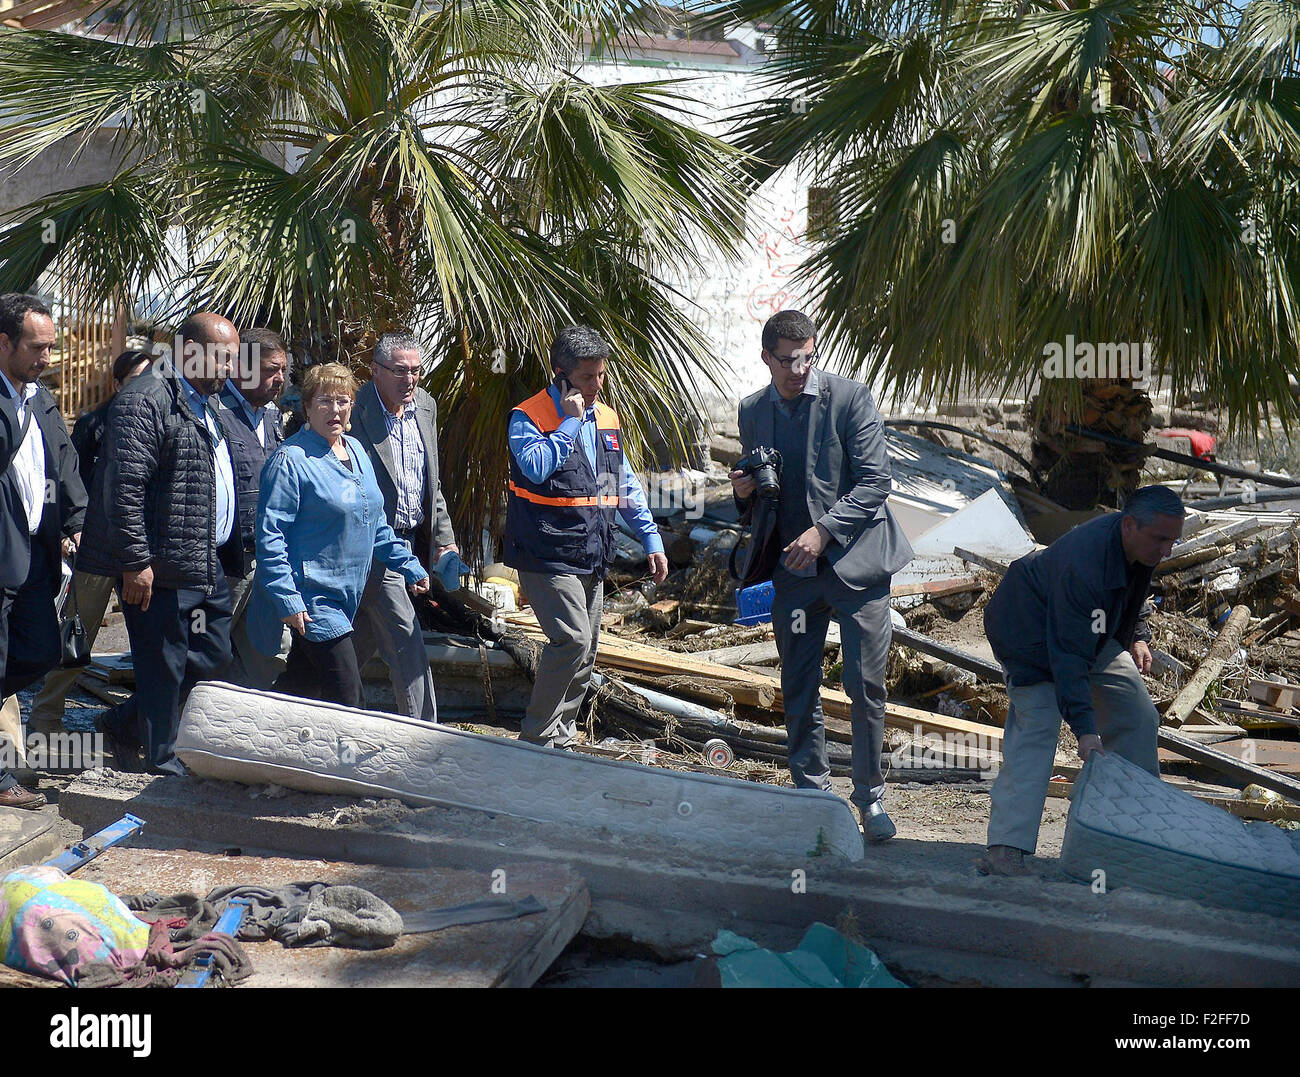 Coquimbo, Chile. 17th Sep, 2015. Image provided by Chile's Presidency shows Chilean President Michelle Bachelet (C) inspecting the coastal area in Coquimbo City, Chile, Sept. 17, 2015. The coastal area in Coquimbo City was damaged by the tsunami following the recent earthquak. The earthquake has so far left ten people dead, according to the Chile's National Office for Emergencies of the Ministry of Interior and Public Security (ONEMI), in addition to the evacuation of a million people. Credit:  Sebastian Rodriguez/Chile's Presidency/Xinhua/Alamy Live News Stock Photo